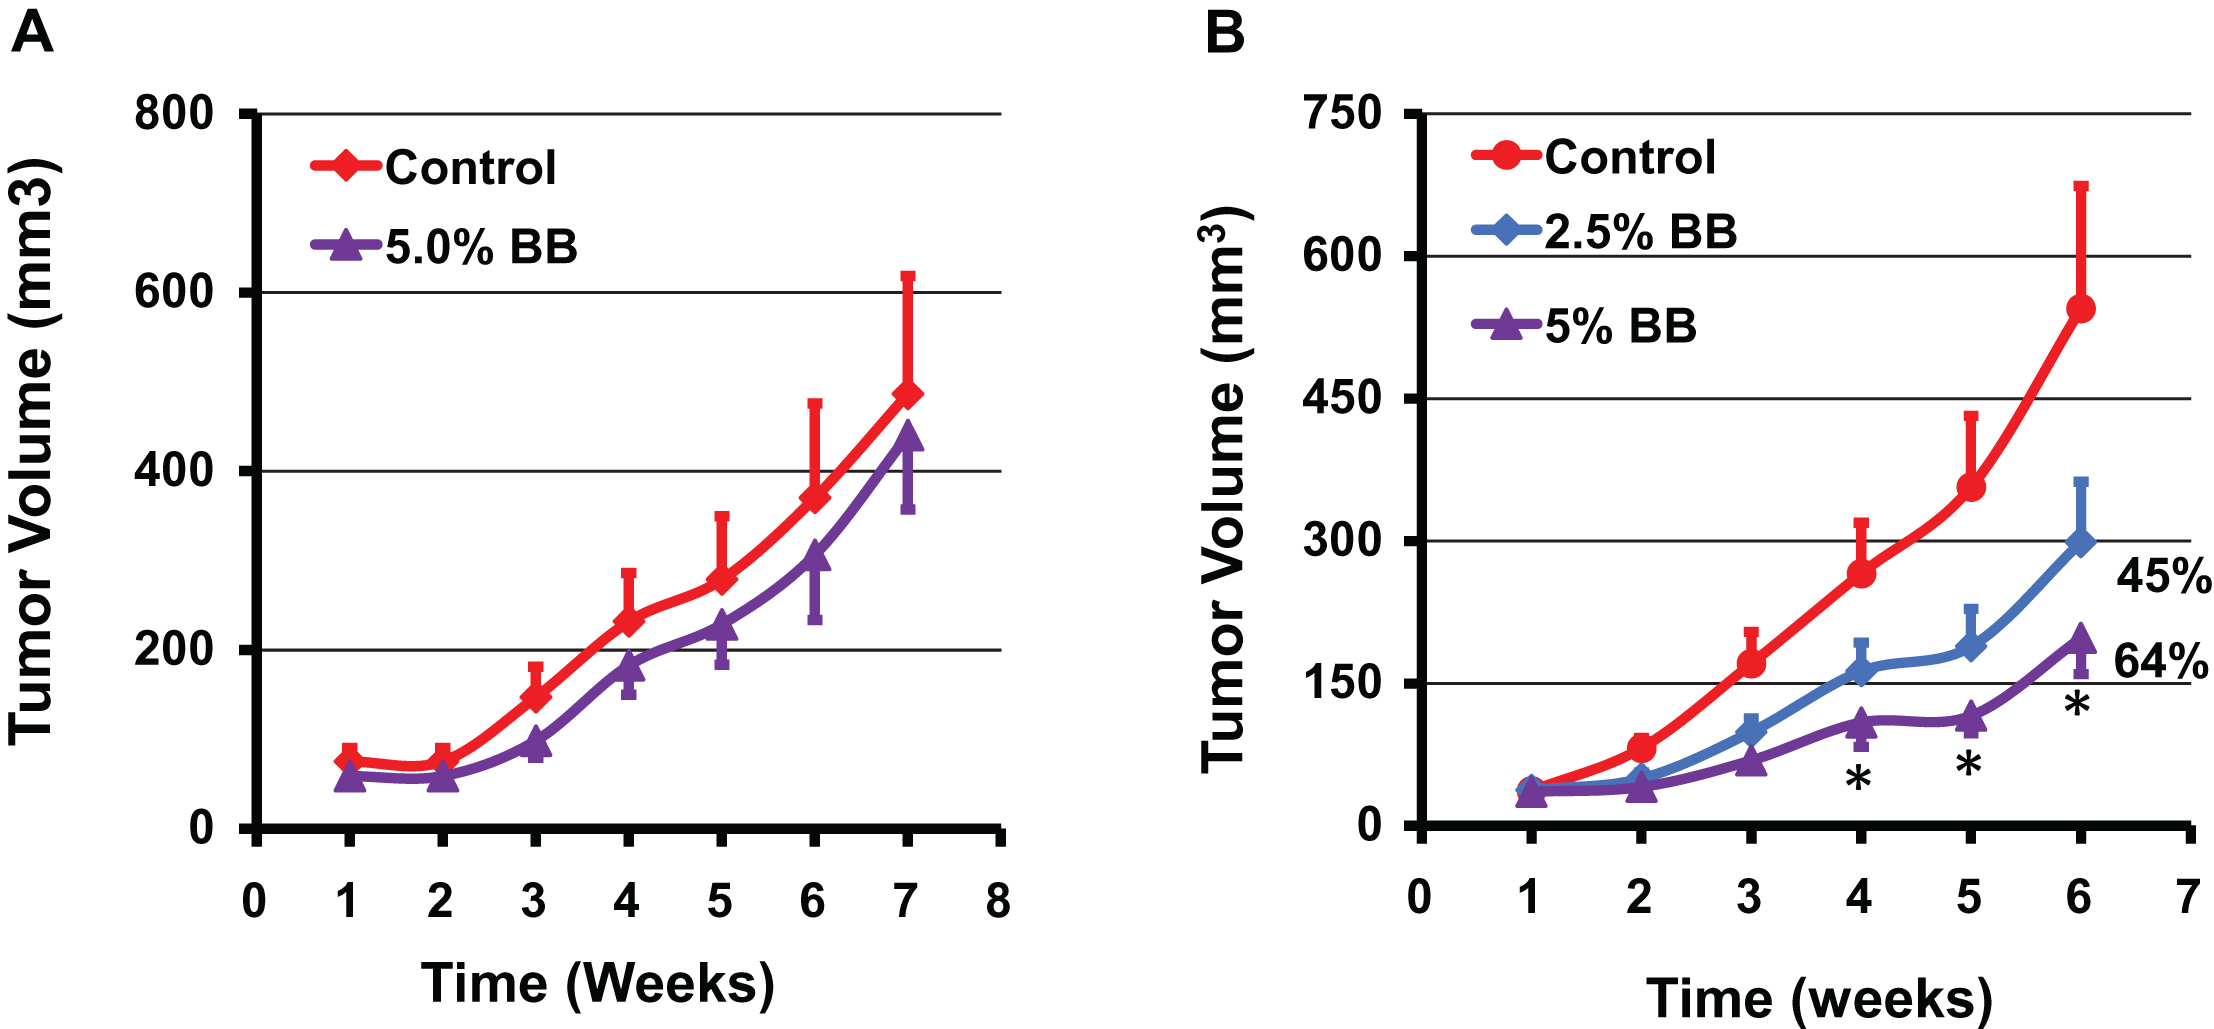 Effect of diet supplemented with indicated doses of blueberry (BB) powder administered before inoculating the tumor cells (A) and after establishment of the tumor cells (B) on the growth of human A549 lung cancer cell xenograft in nude mice. Mice (n = 8) were fed either control diet (AIN 93M) or diet supplemented with blueberry powder (2.5 and 5% w/w) and euthanized after 7 weeks when tumor volume reached ∼600 mm3. Data represent mean±SE. p value < 0.05 was considered significant (two-tailed Student’s t test).